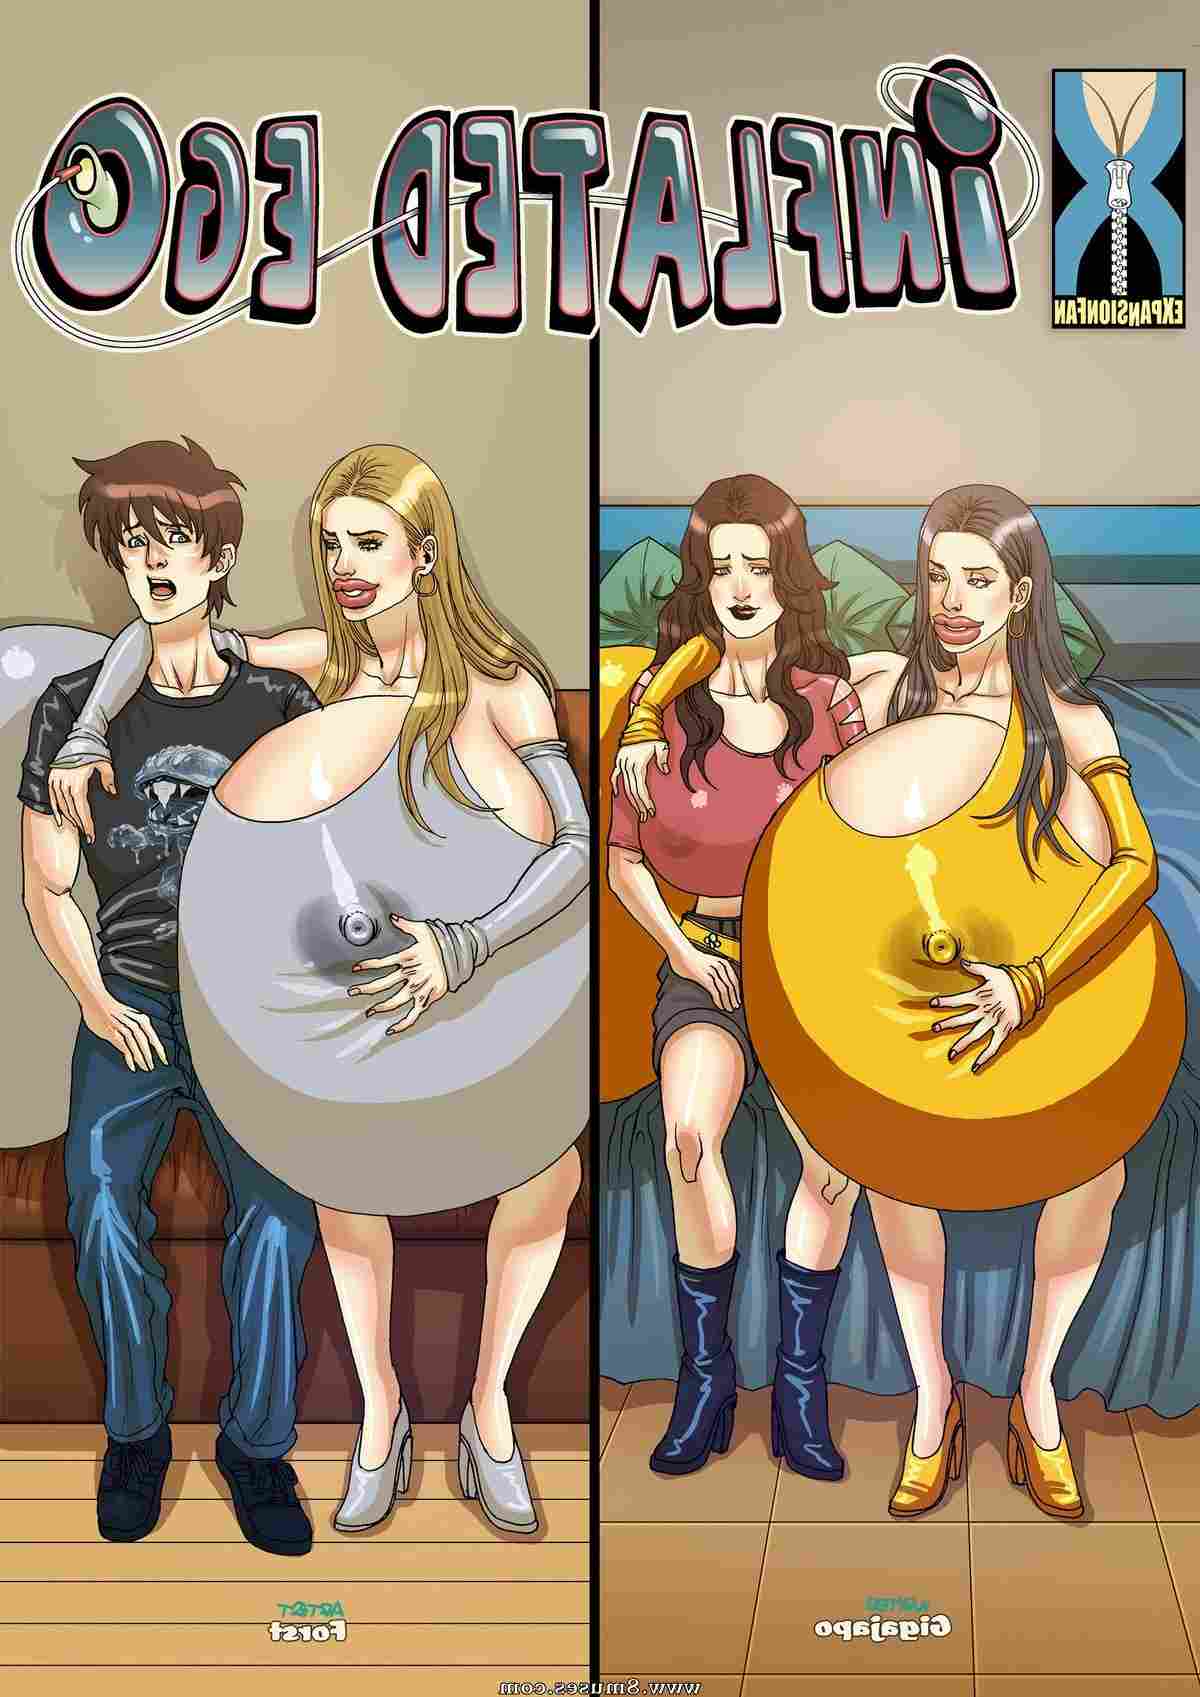 Expansionfan-Comics/Inflated-Ego Inflated_Ego__8muses_-_Sex_and_Porn_Comics_7.jpg